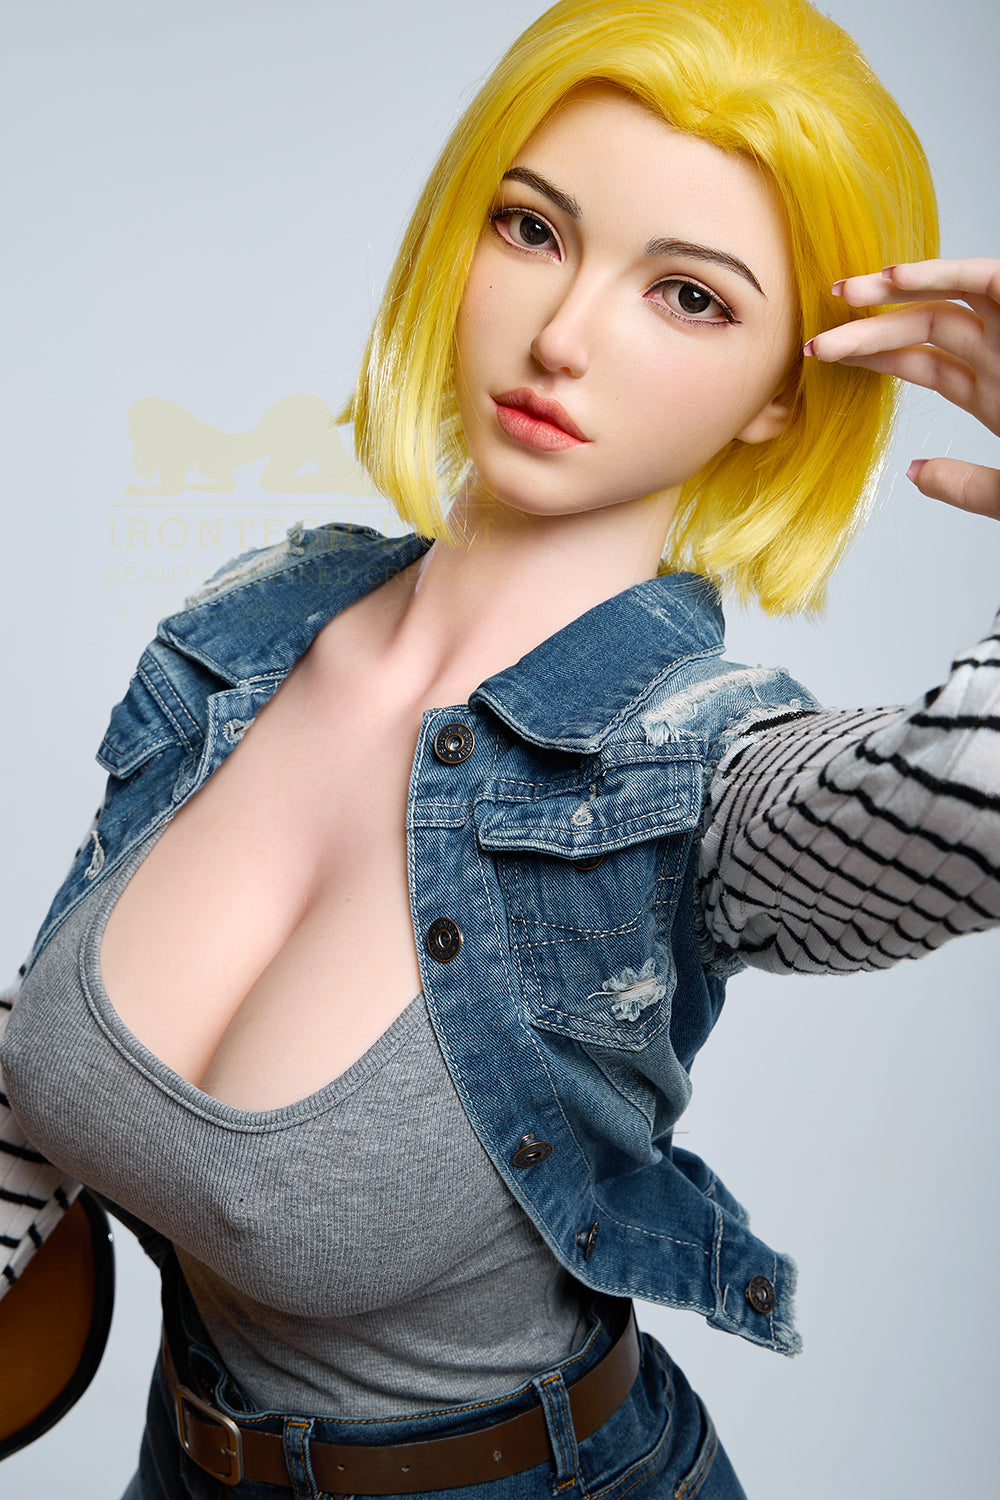 Irontechdoll Katie 159cm S41 Natural Skin Sex Doll Full Silicone Realistic Adult Love Doll